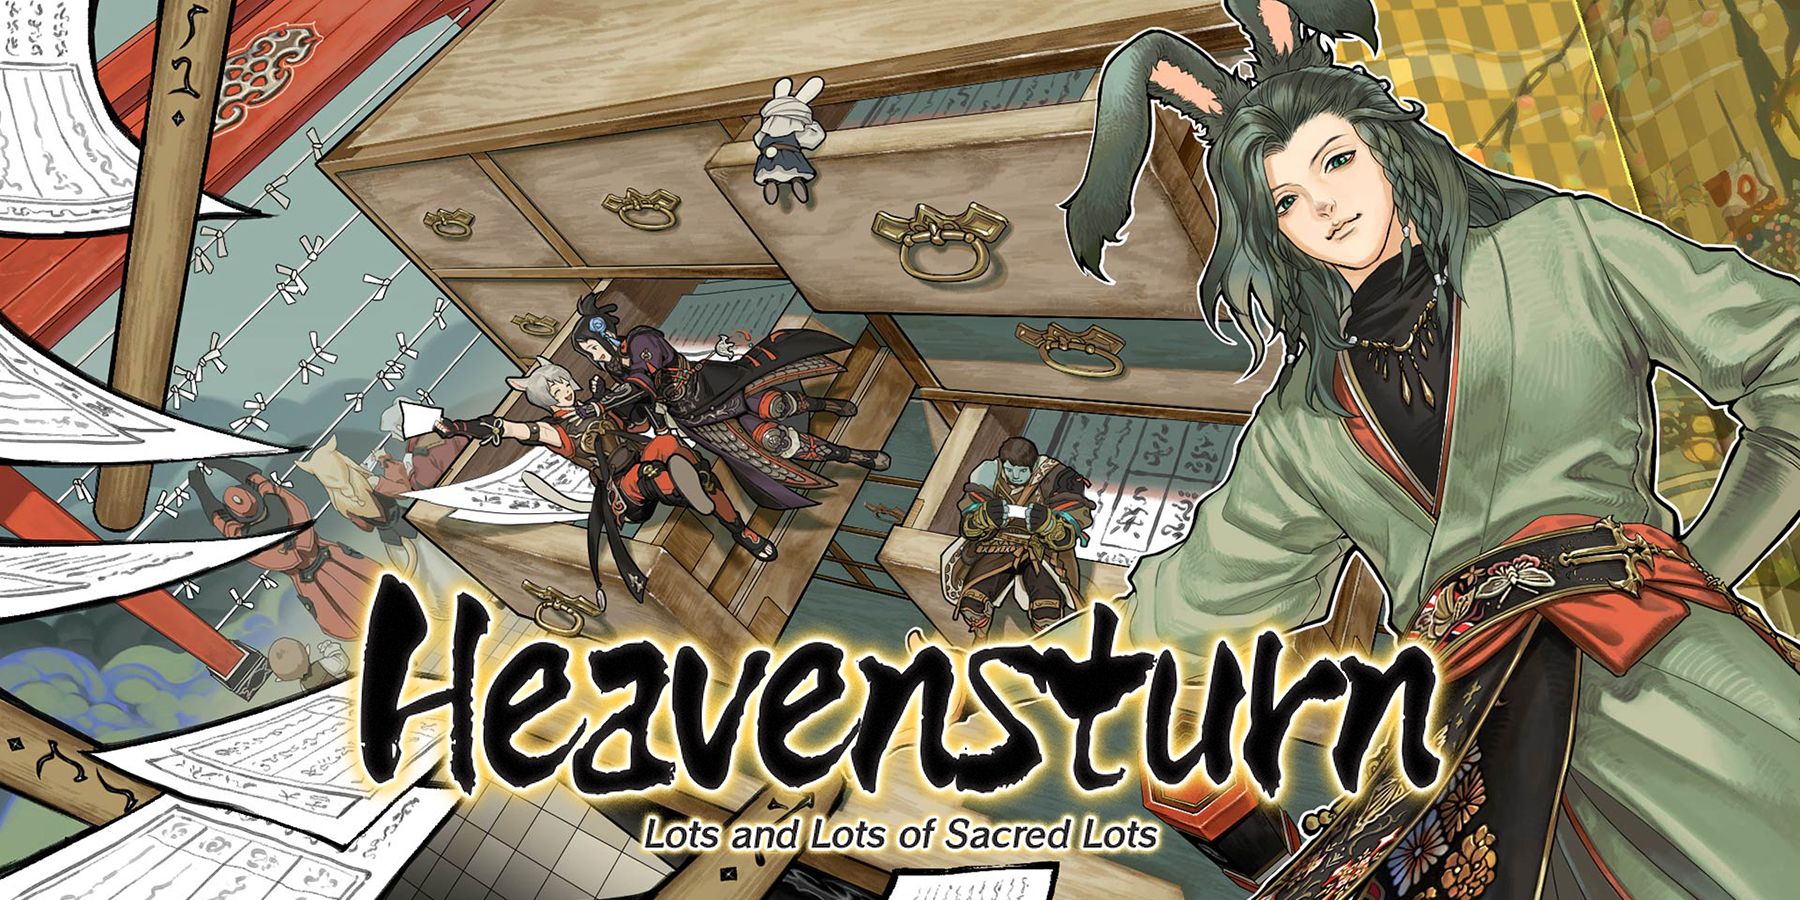 Final Fantasy 14 Announces Heavensturn Seasonal Event With
Exciting New Rewards